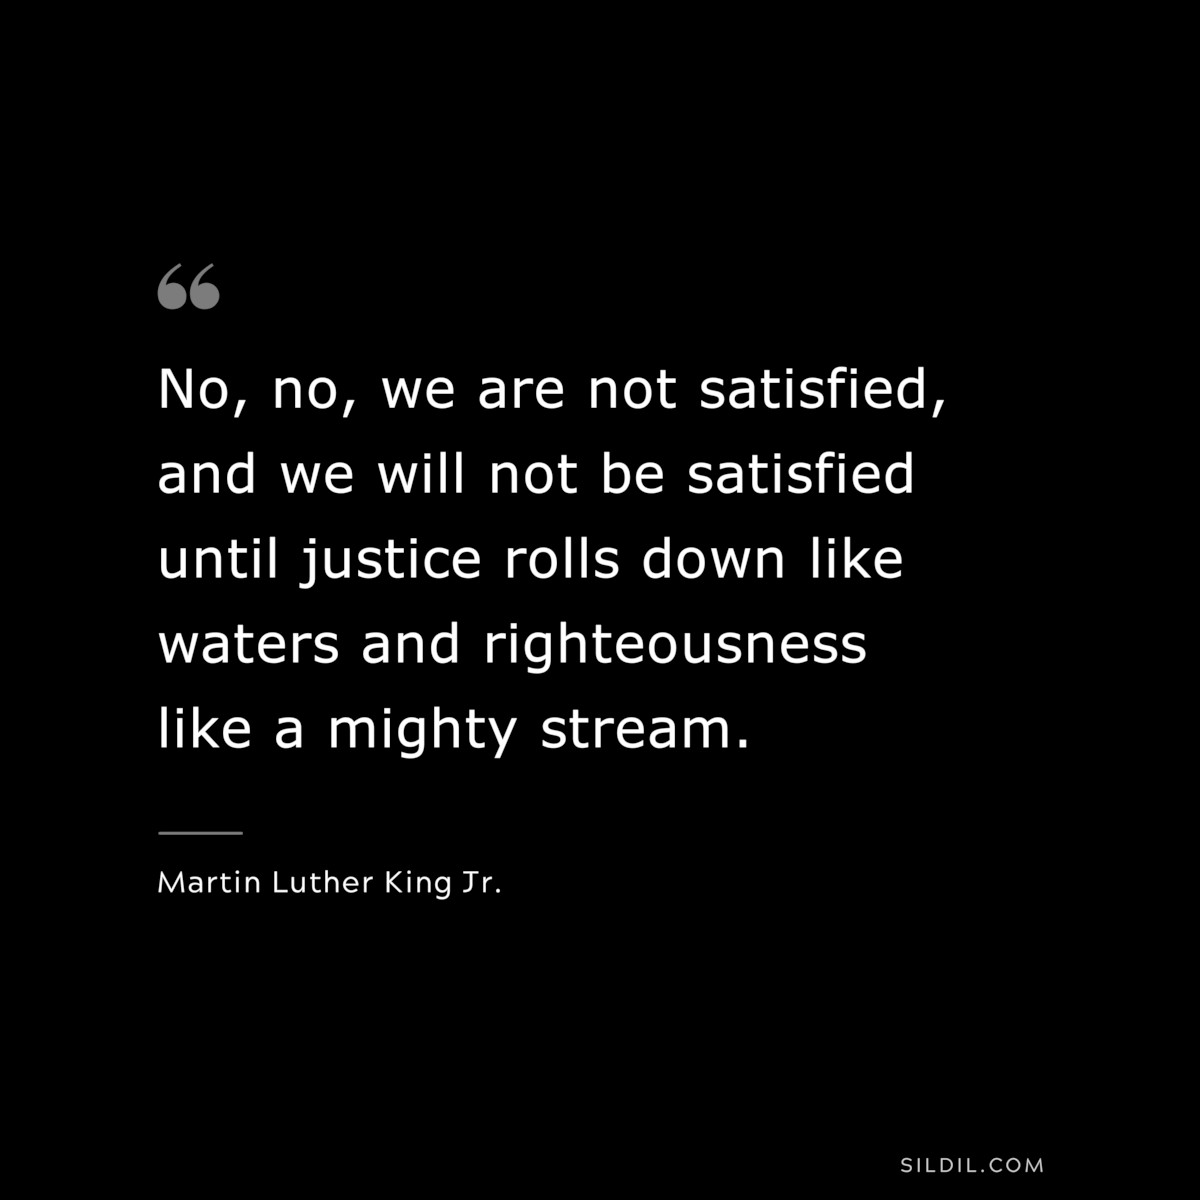 No, no, we are not satisfied, and we will not be satisfied until justice rolls down like waters and righteousness like a mighty stream. ― Martin Luther King Jr.